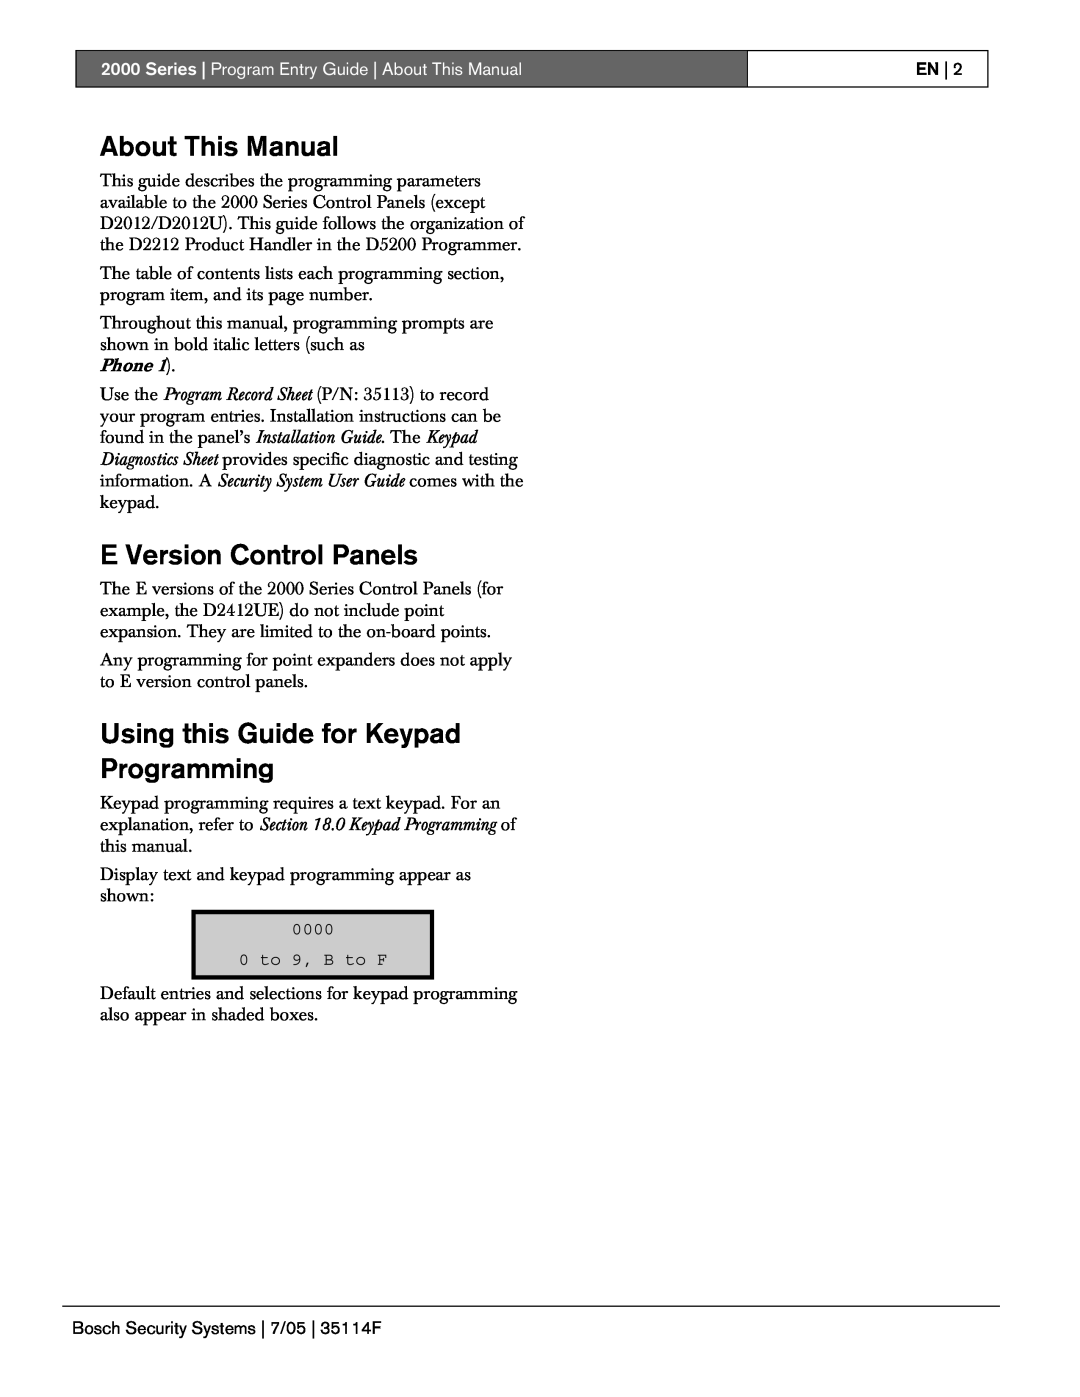 Bosch Power Tools 2000 manual About This Manual, E Version Control Panels, Using this Guide for Keypad Programming, En 